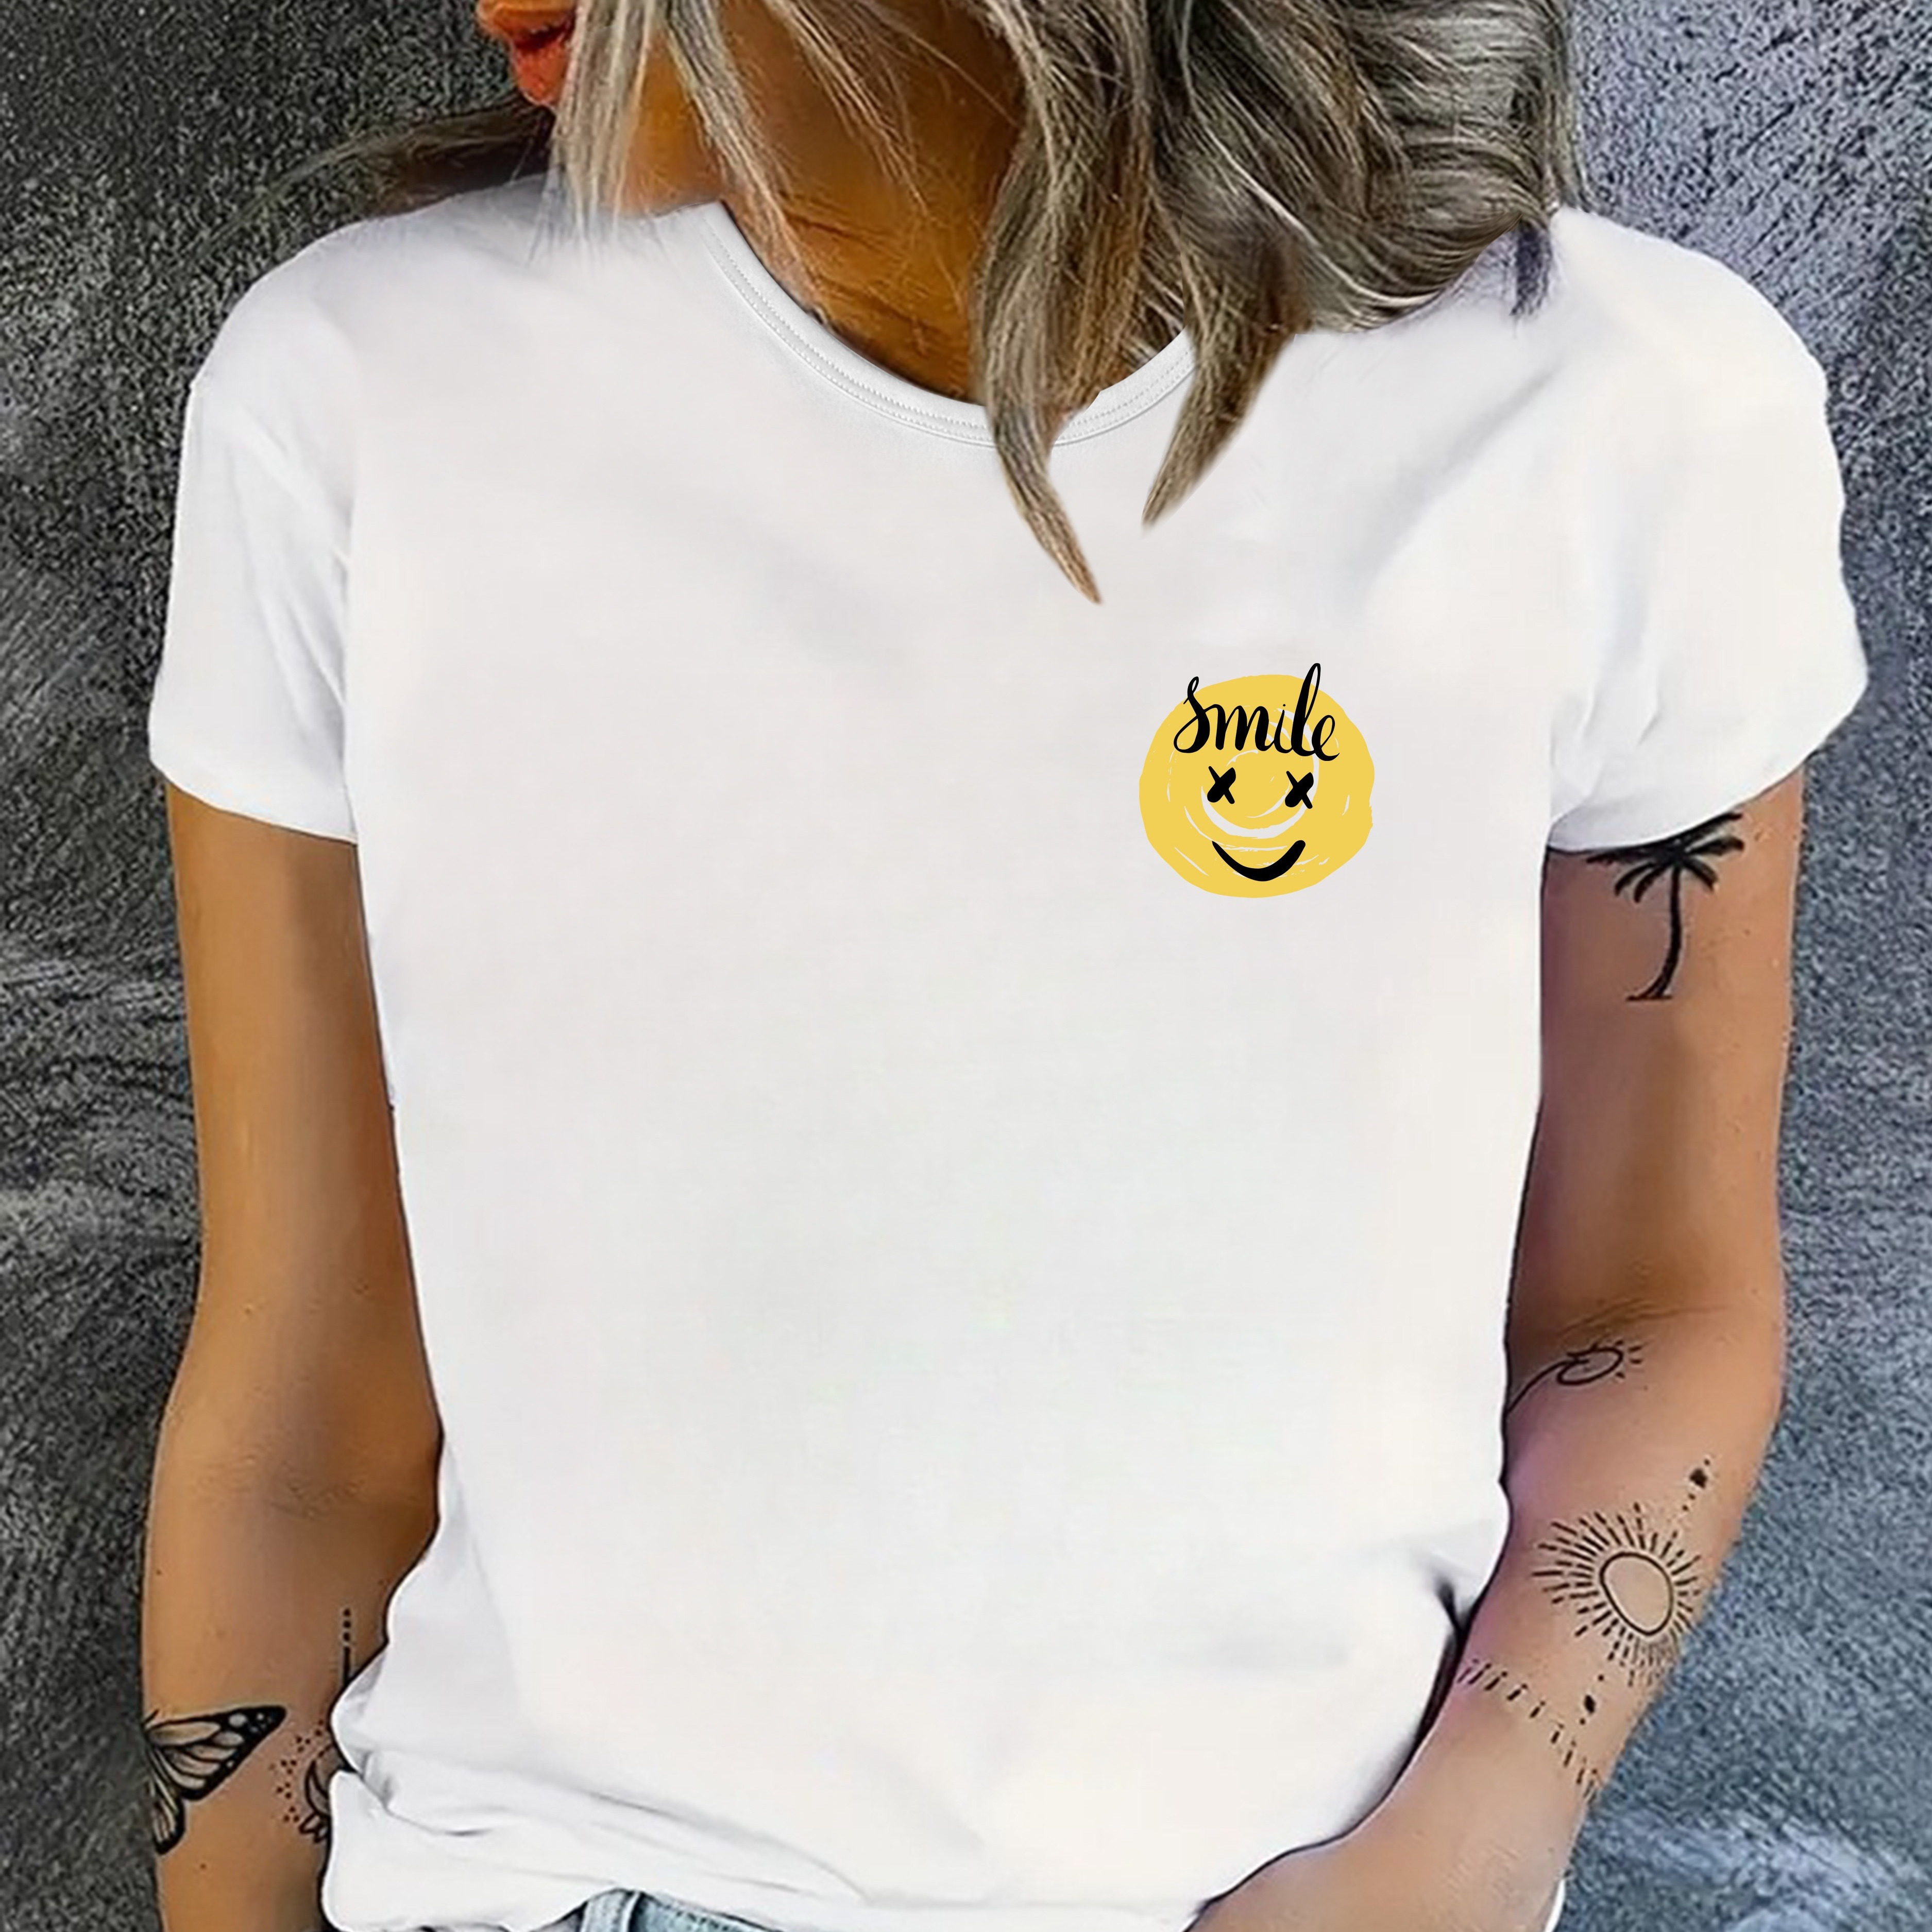 

Smiling Face Print T-shirt, Short Sleeve Crew Neck Casual Top For Summer & Spring, Women's Clothing